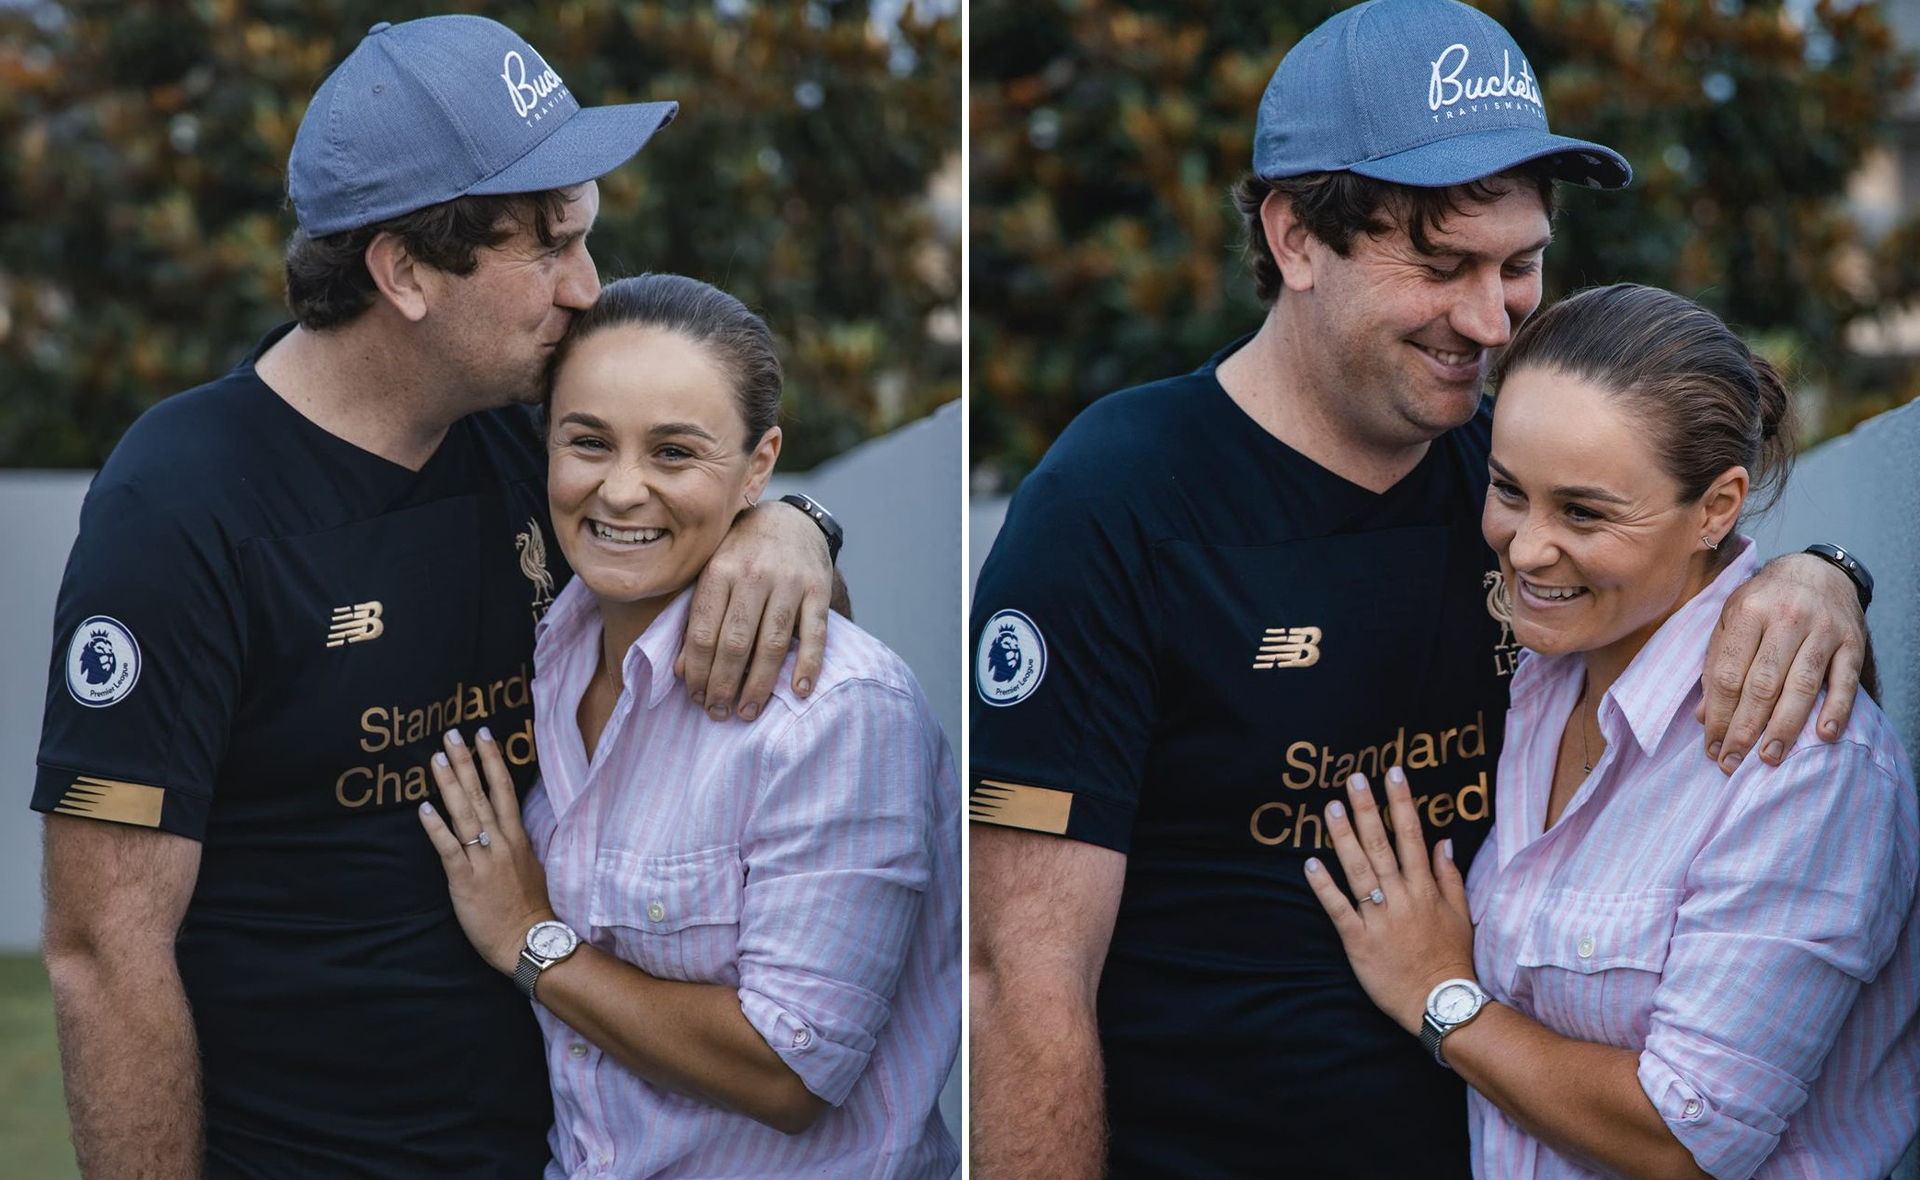 She said yes! Ash Barty is engaged to longtime partner Garry Kissick and they couldn’t look happier